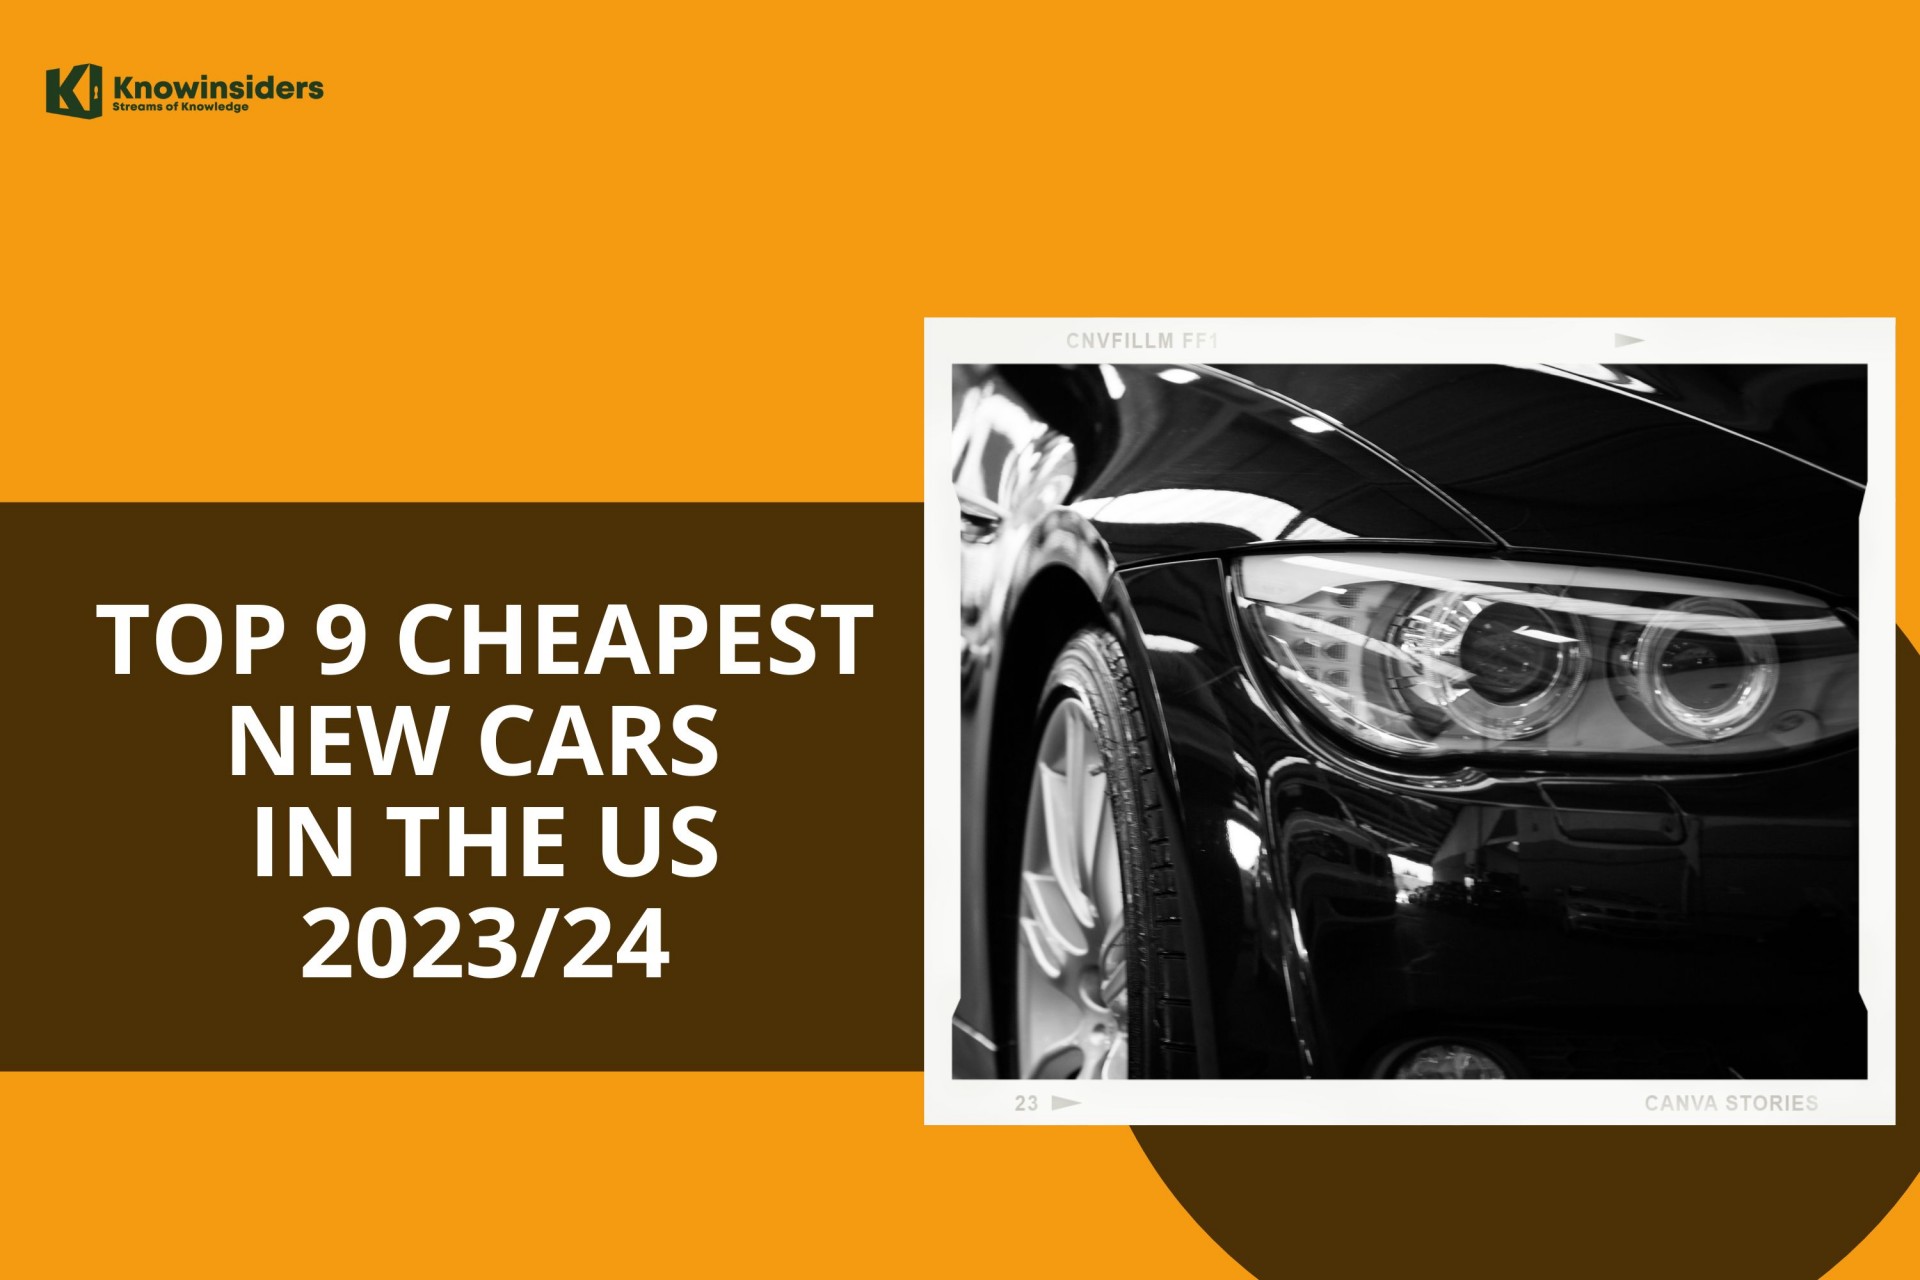 Top 9 Cheapest New Cars In The US 2023/2024